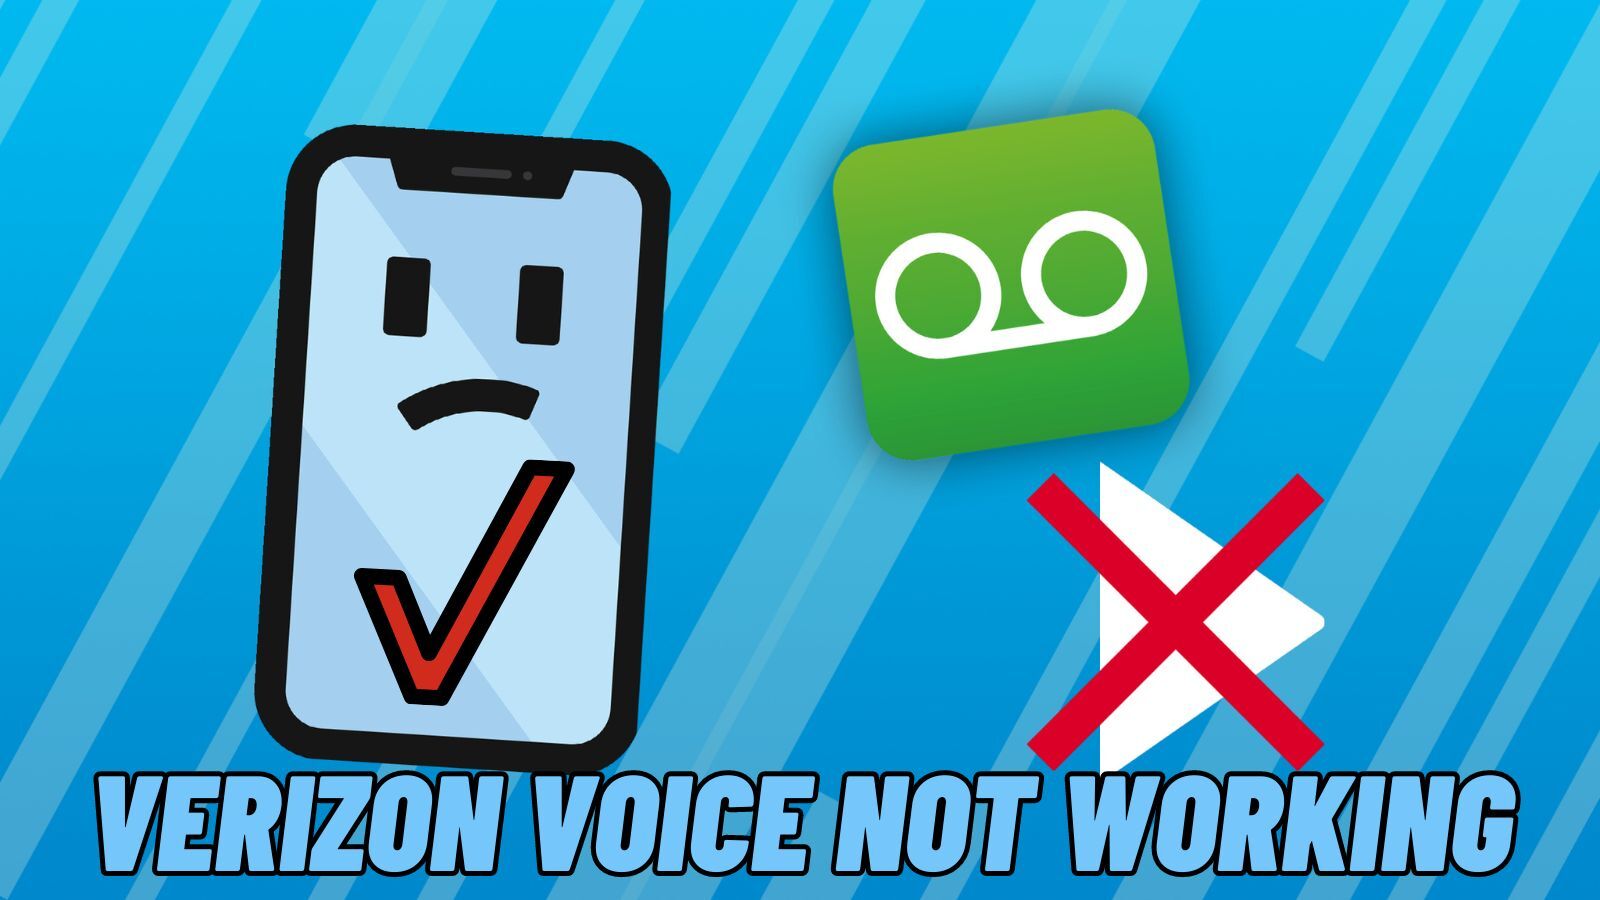 Verizon Voice Not Working: How to Fix Your Verizon Voicemail?